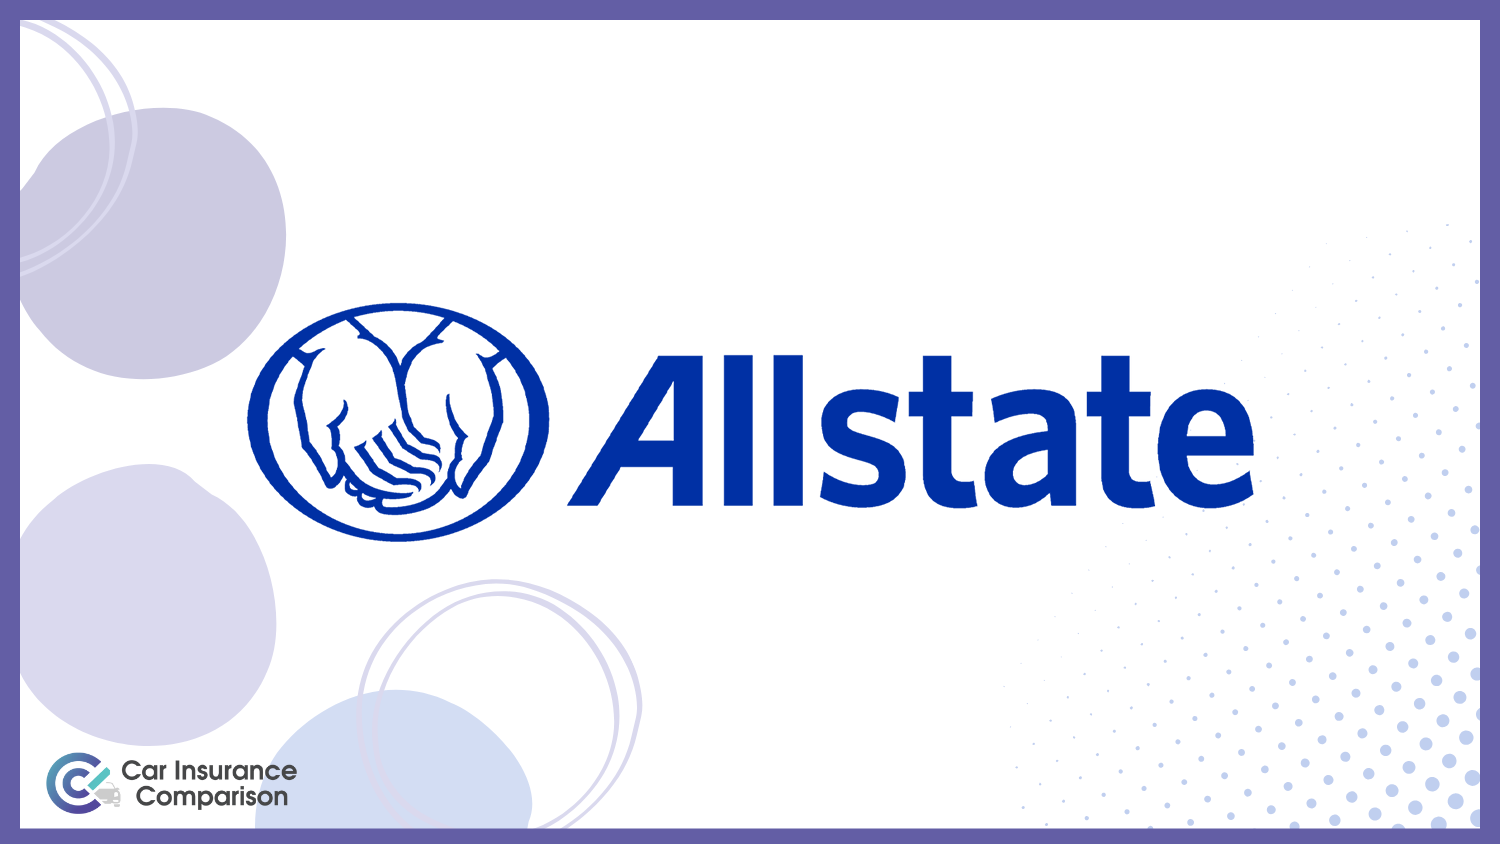 Allstate: Compare Professional Engineer Car Insurance Rates